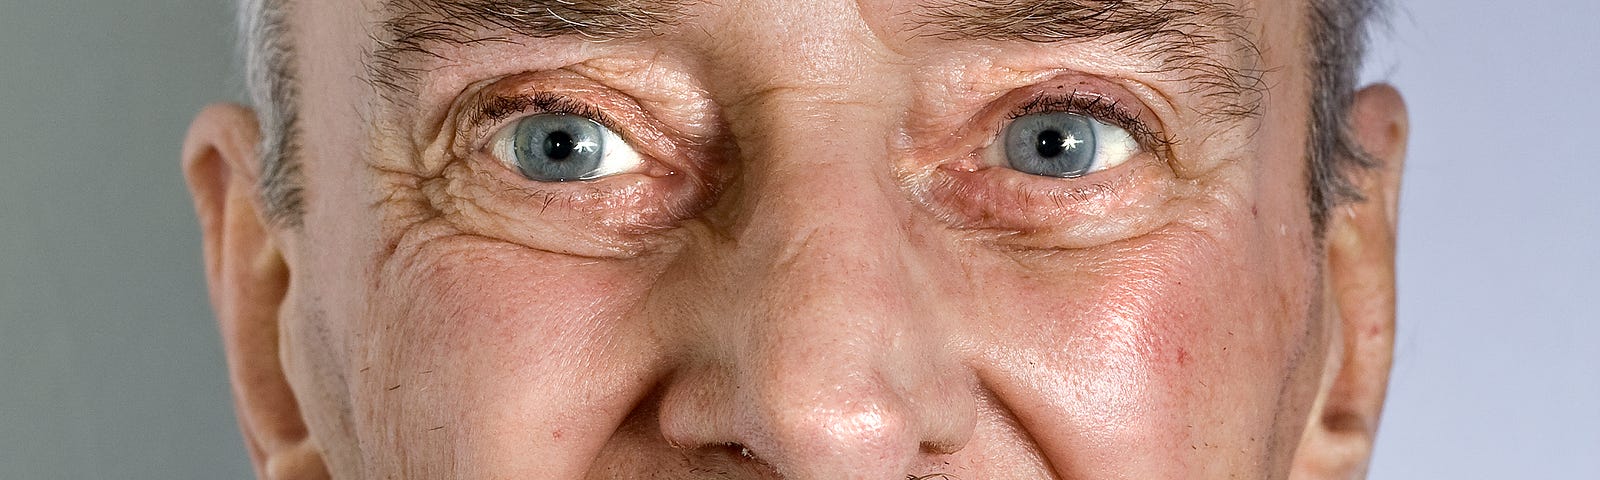 close up of smiling older man with mustache and blue eyes